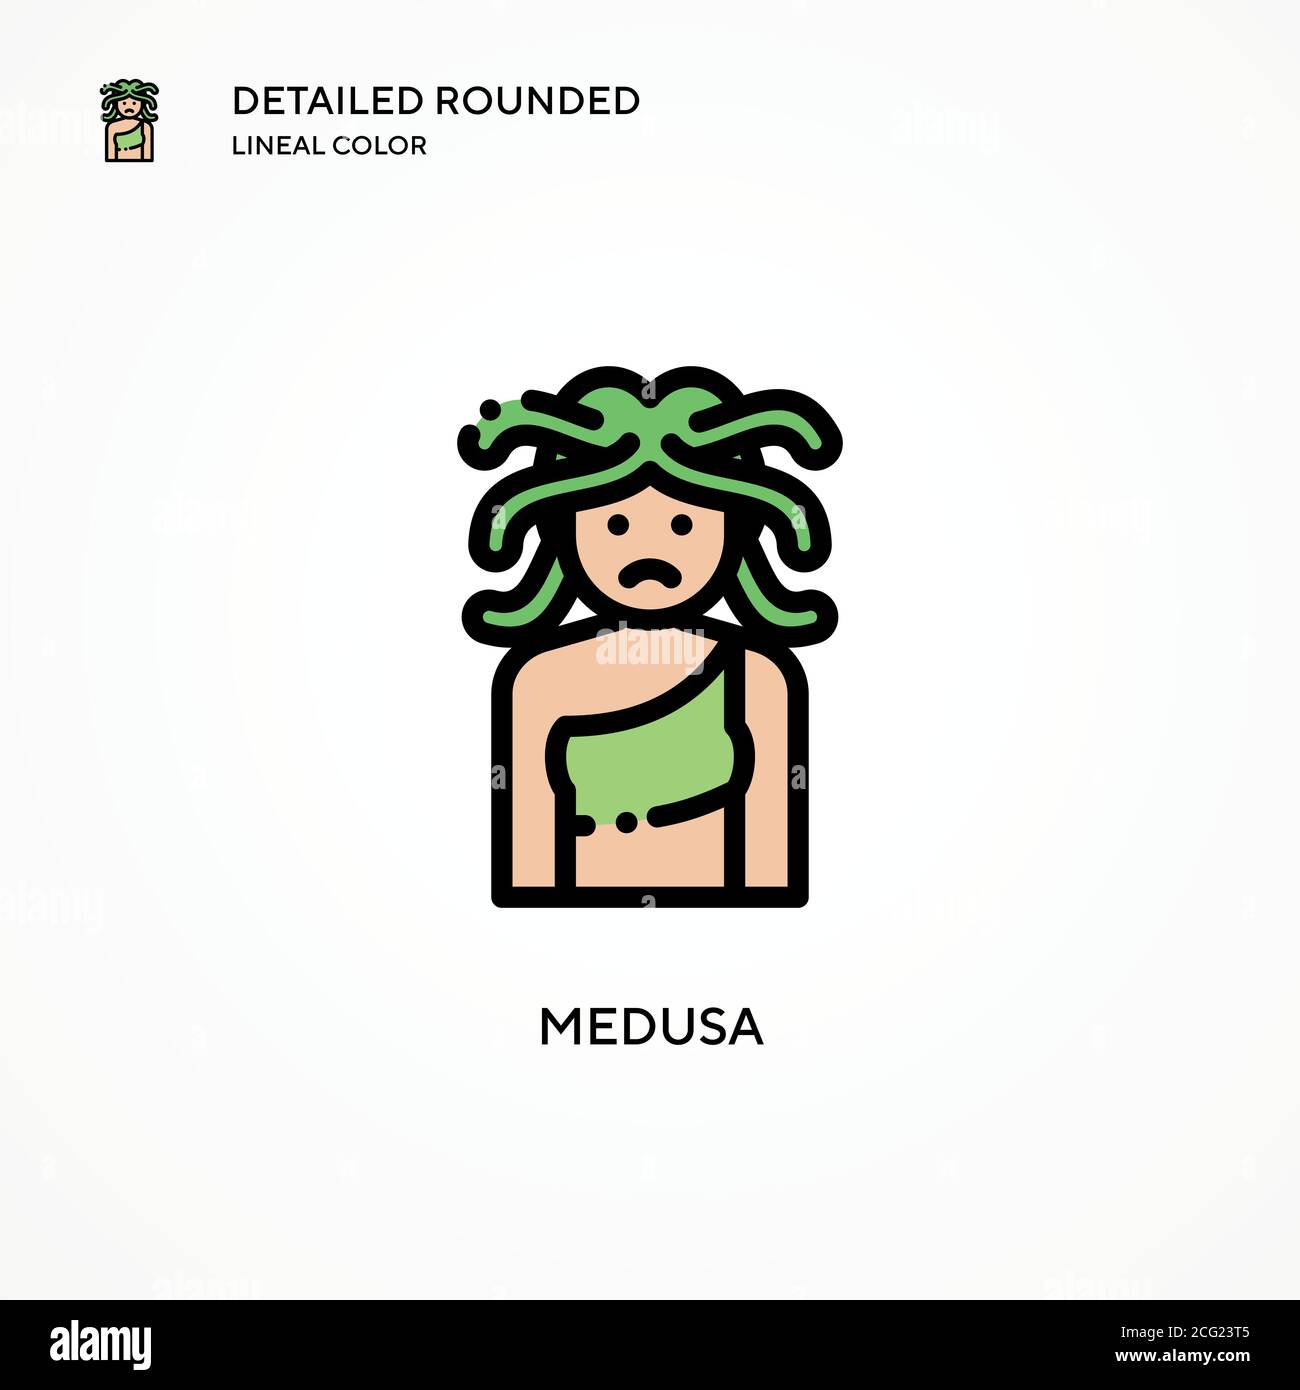 Medusa vector icon. Modern vector illustration concepts. Easy to edit and customize. Stock Vector